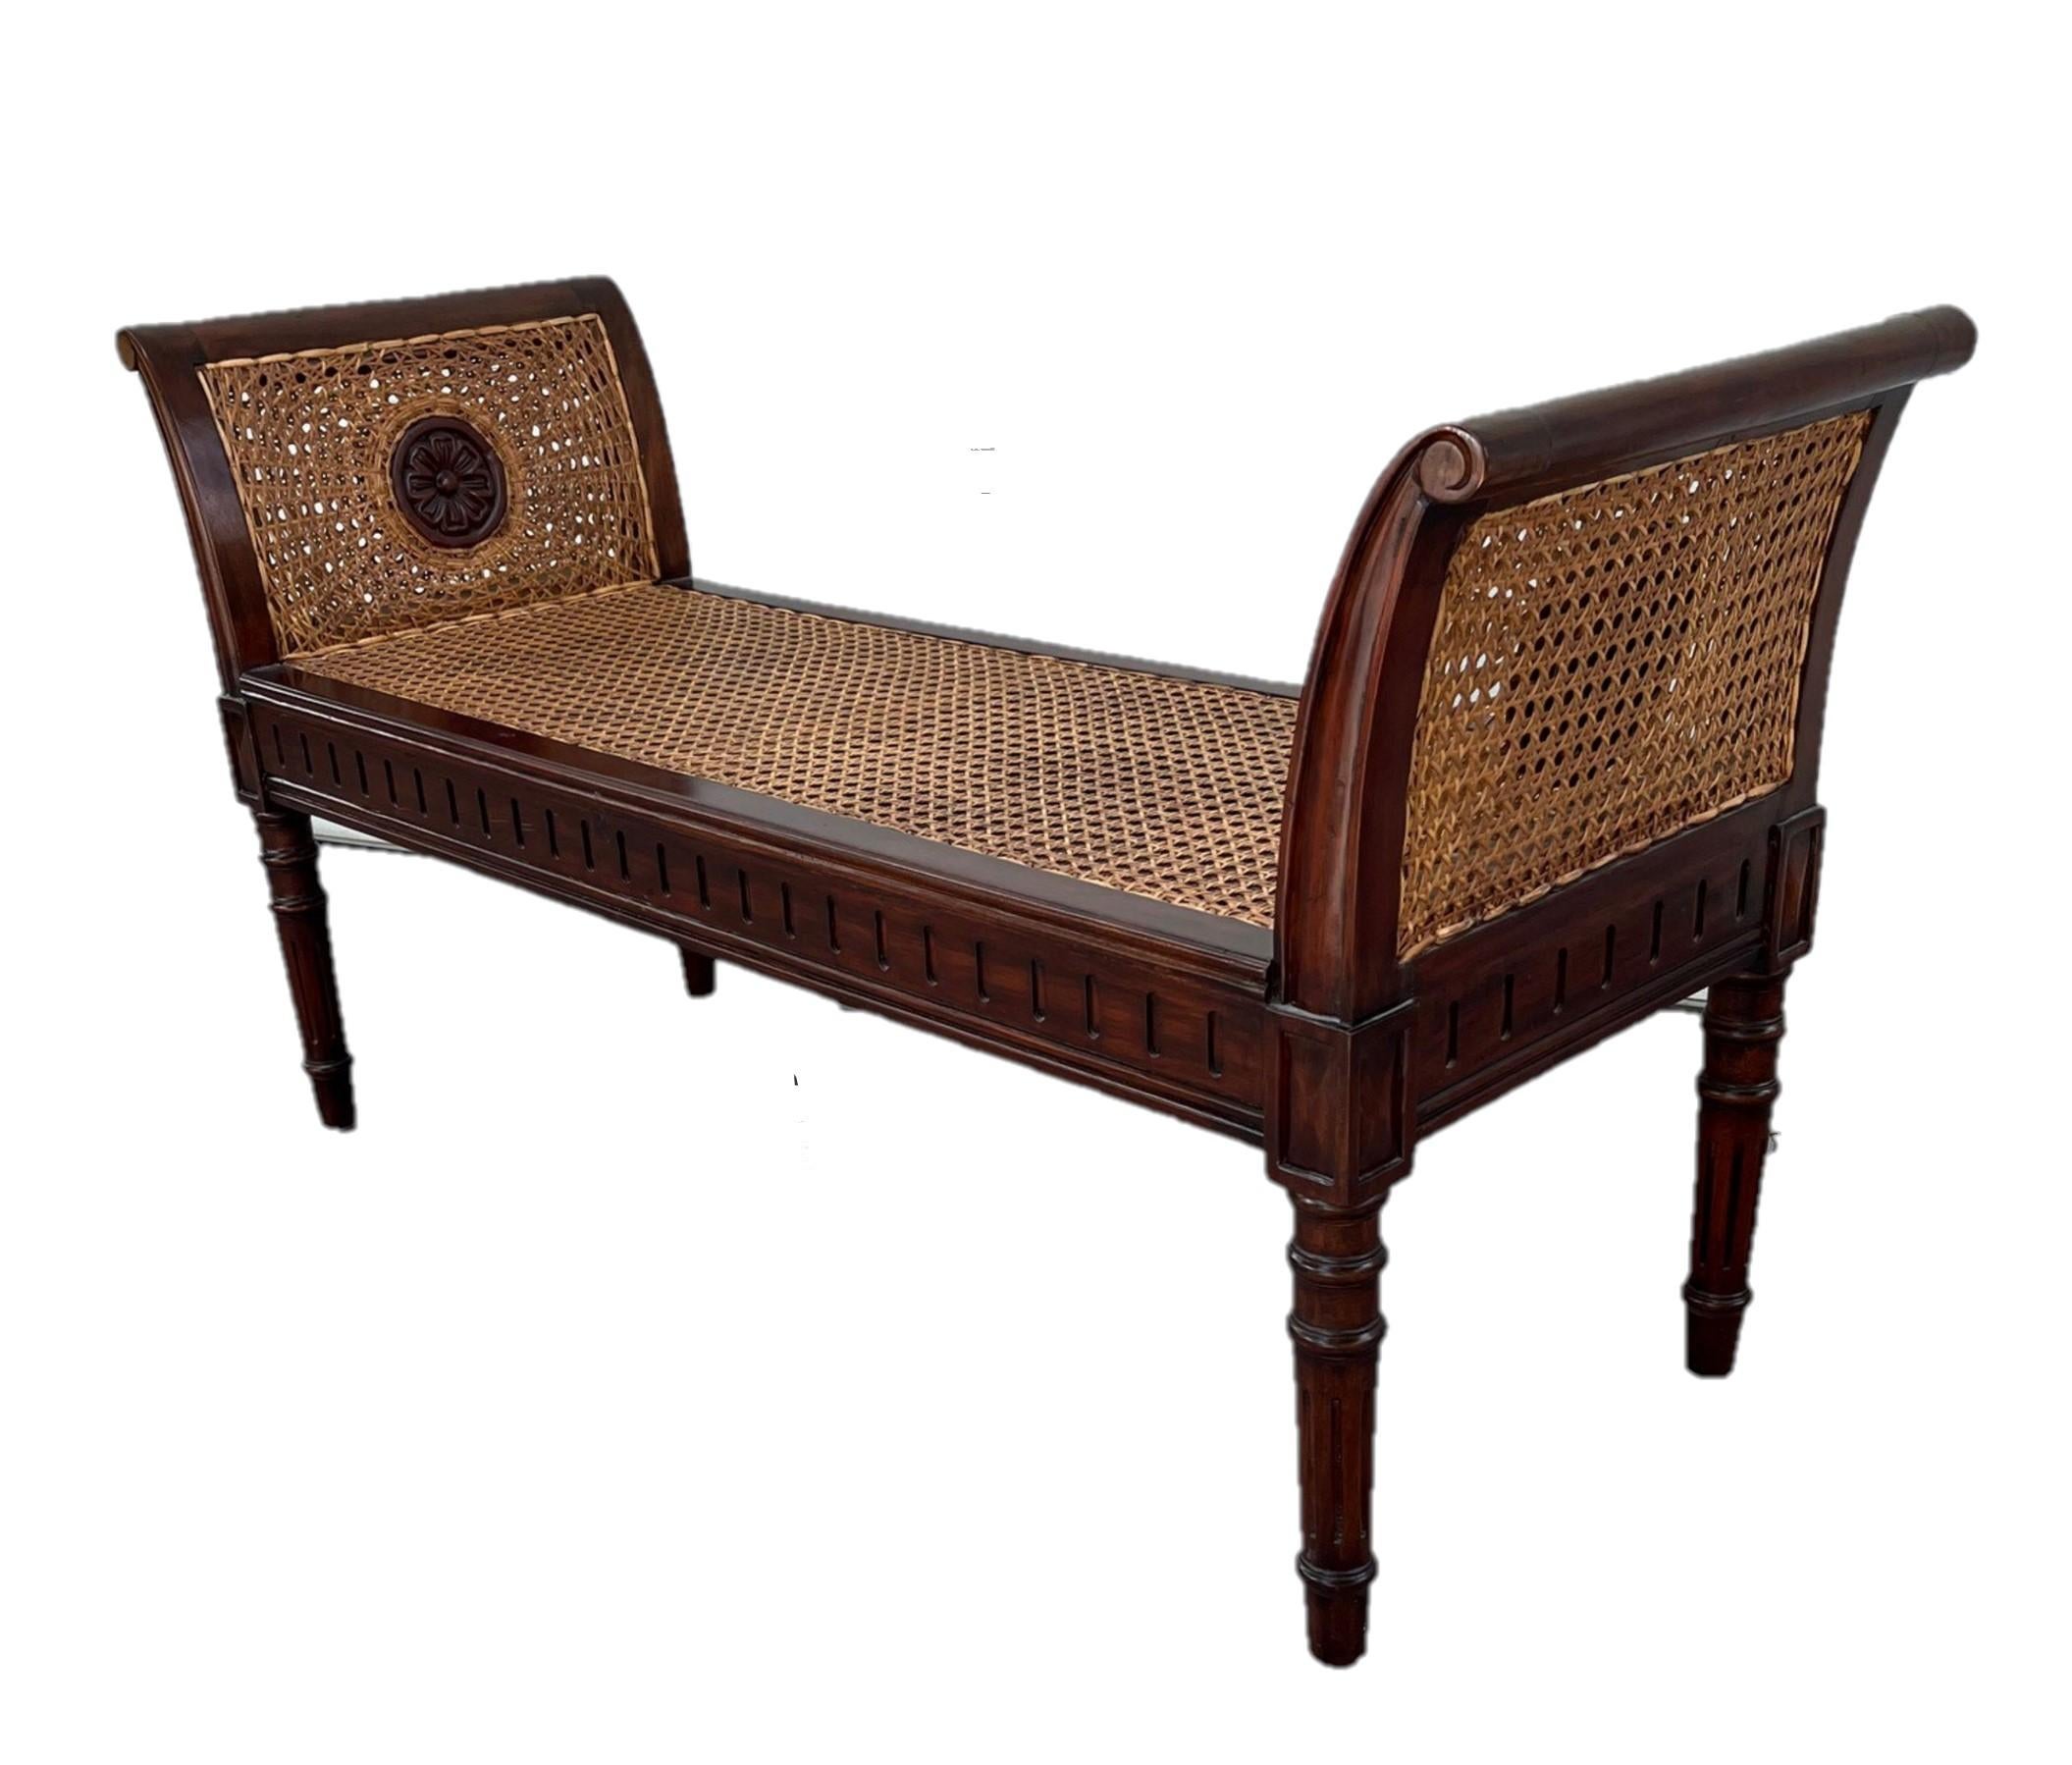 English Regency Style mahogany caned window bench / hall bench ca. 1900

Elegant Regency style mahogany caned window bench in neoclassical taste.
Both sides have scrolled ends with carved rosettes on turned legs. This delightful
bench is built